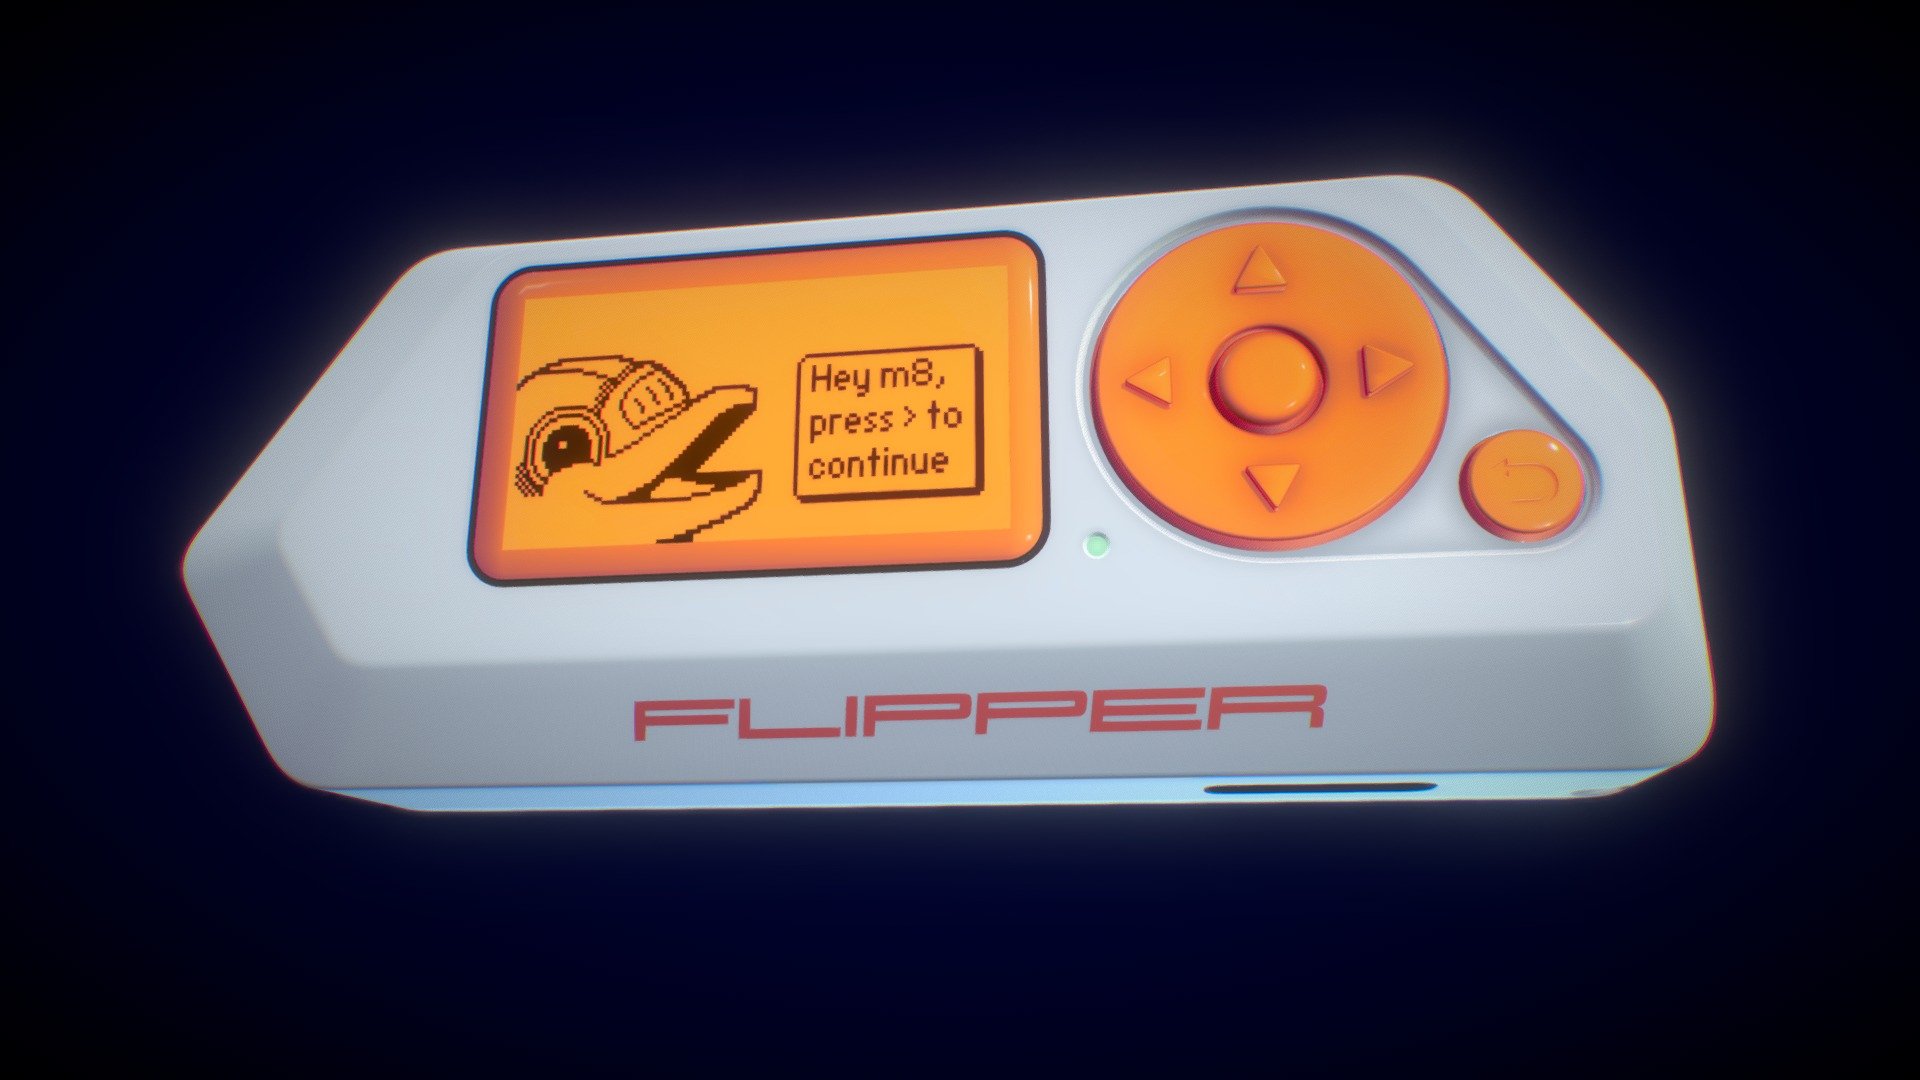 Made with the .stl file found at: https://github.com/flipperdevices/flipperzero-3d-models

Flipper Zero got me too excited. Decided to have some fun with it while I wait for the cargo :) - Flipper Zero - Download Free 3D model by blazitt 3d model